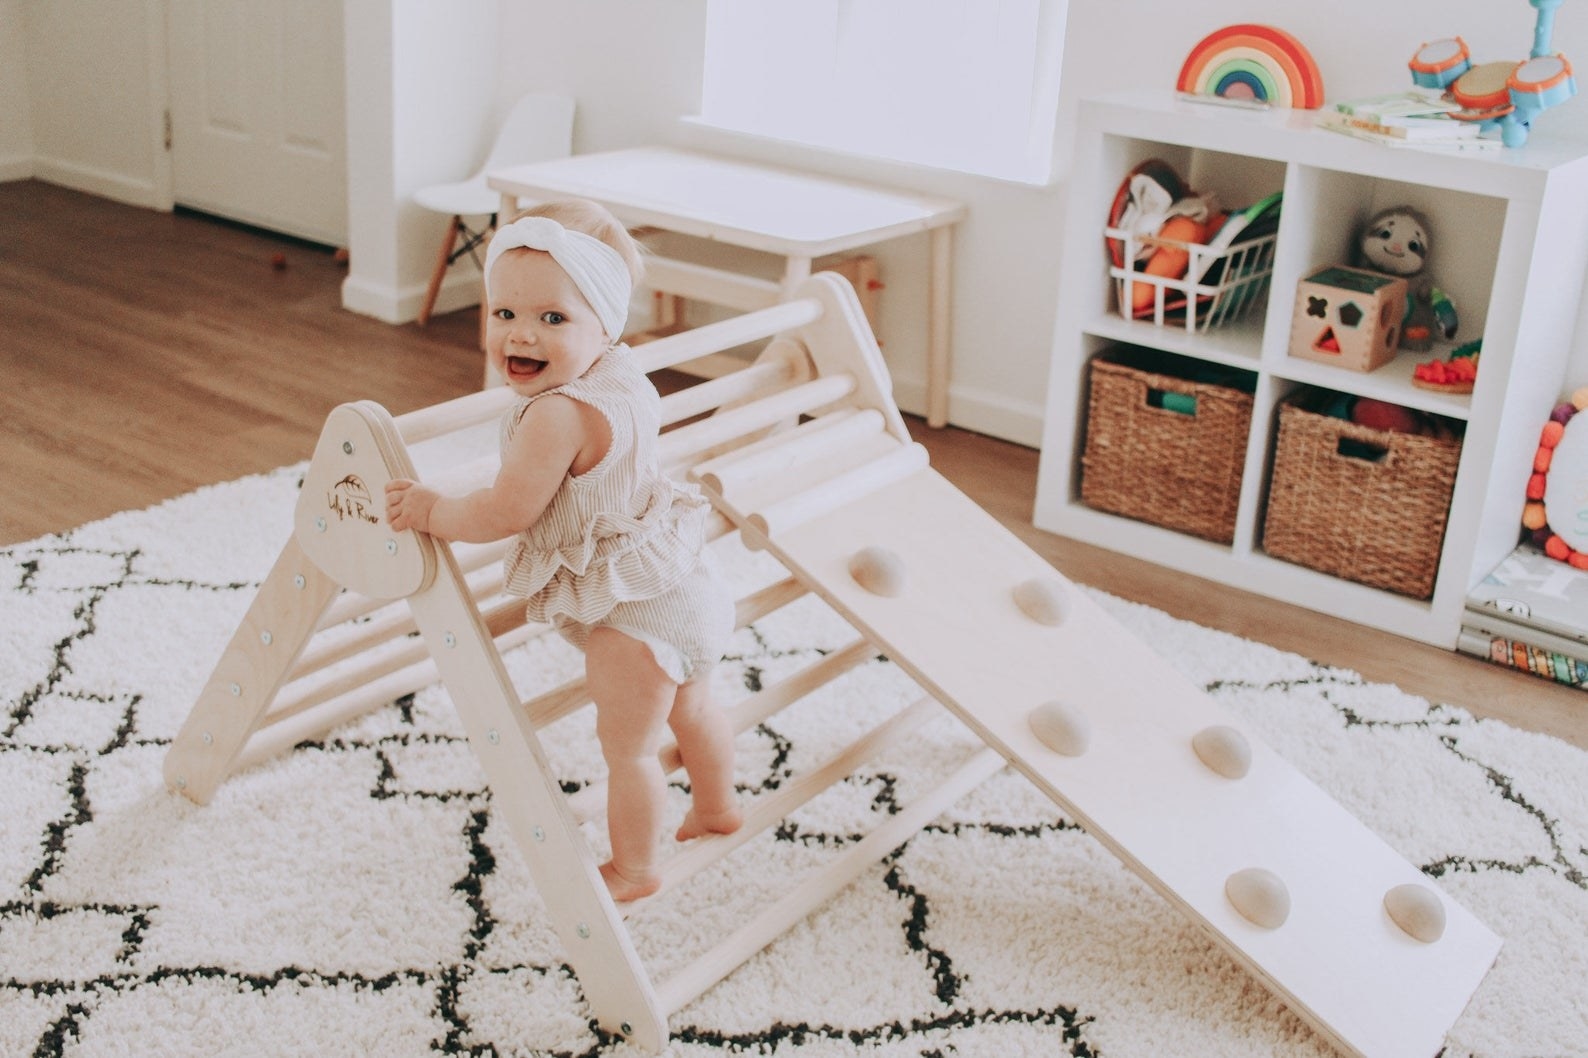 baby standing on the wooden climber with different rugs for stepping and a slide